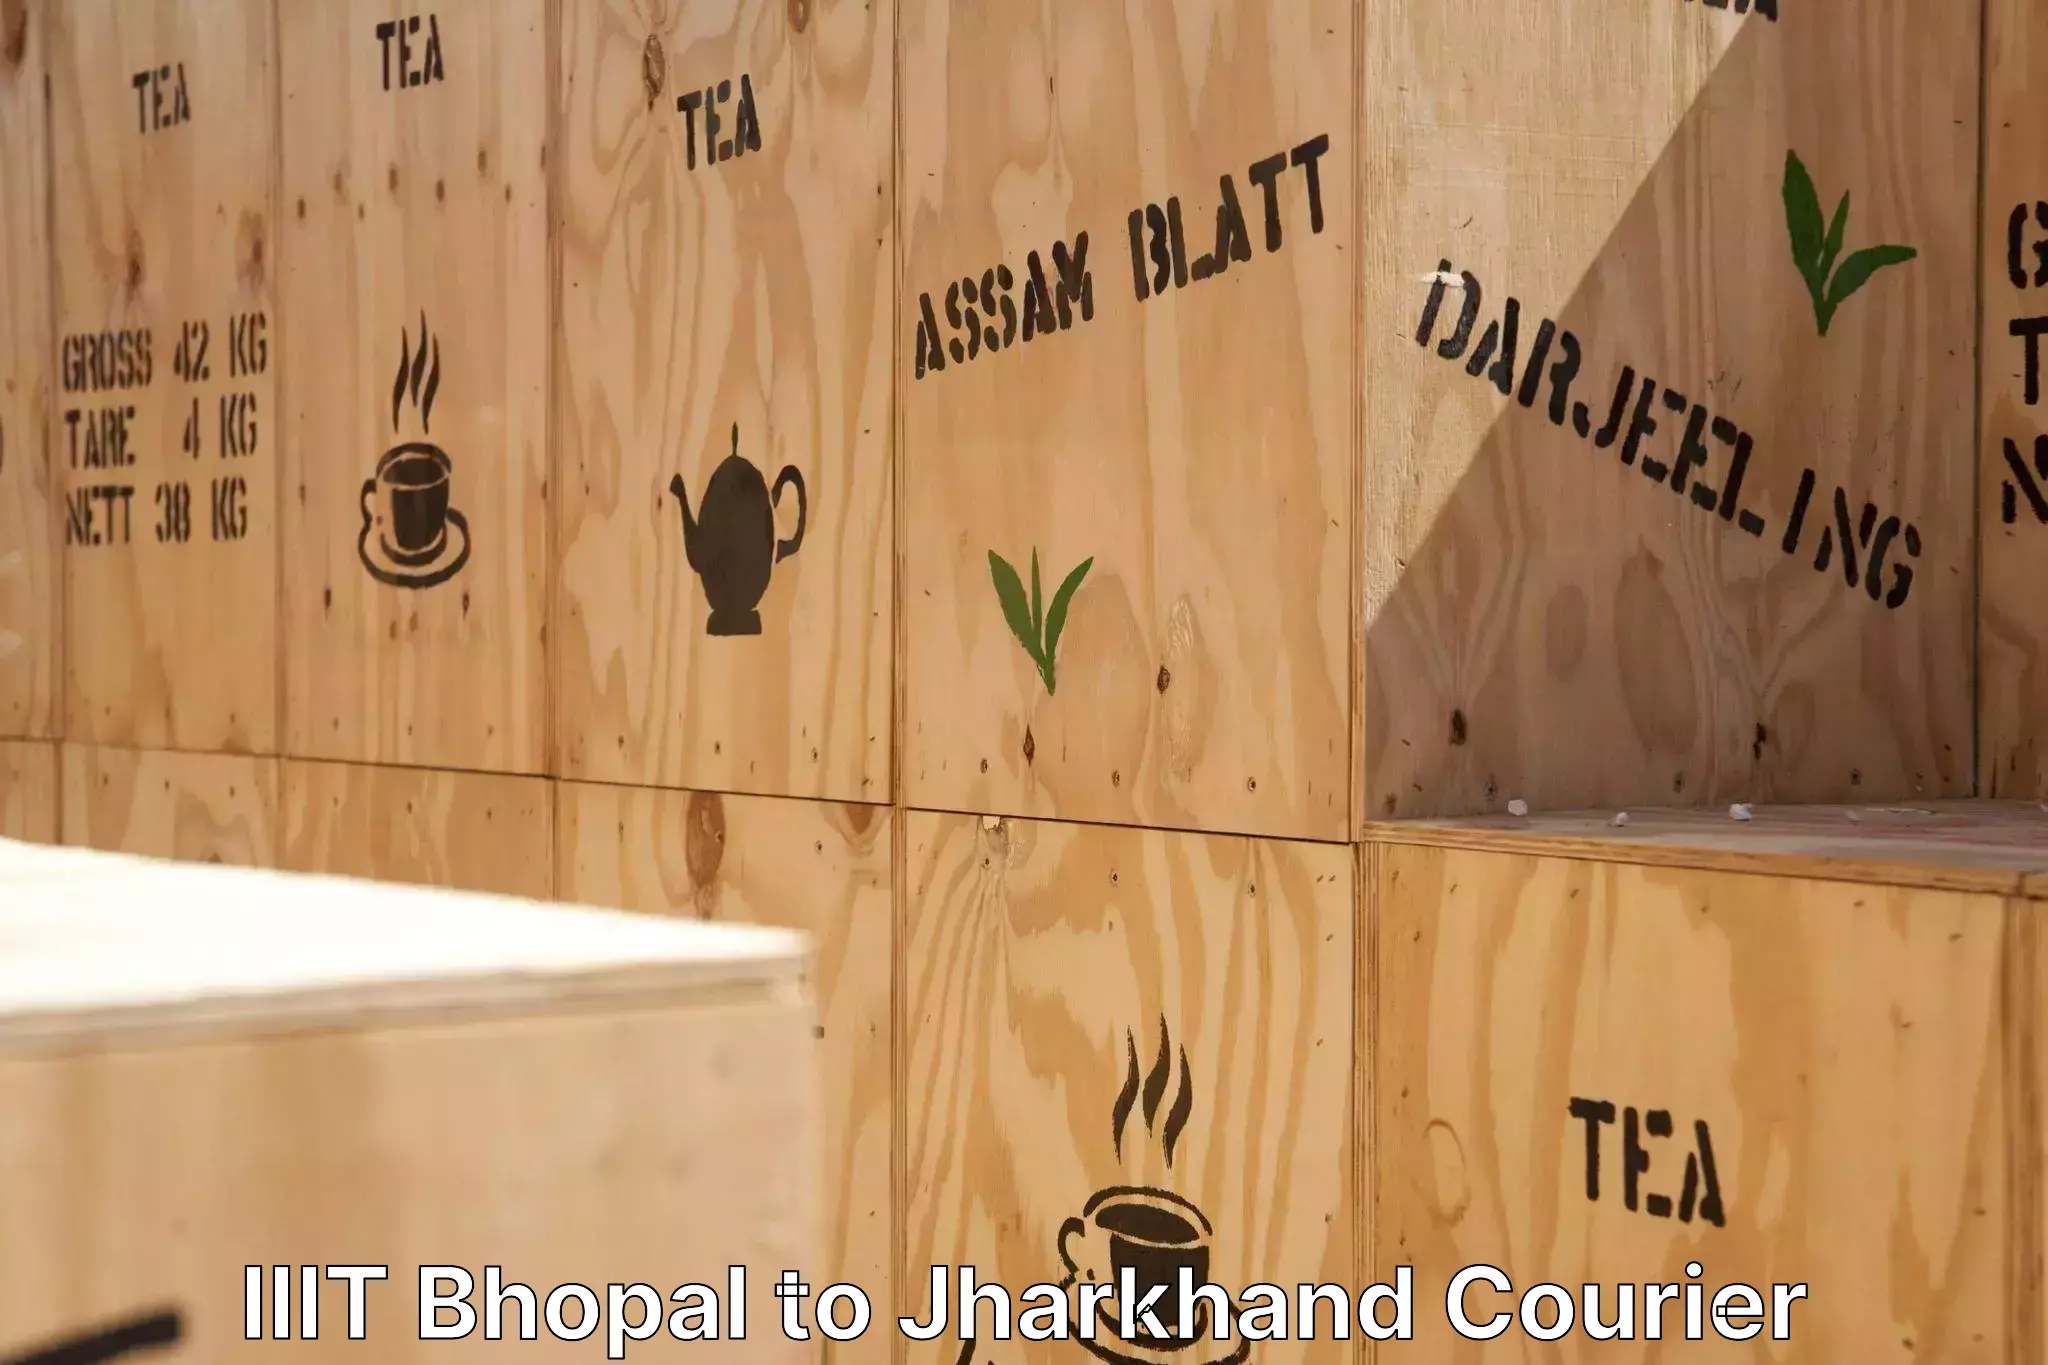 Budget-friendly movers IIIT Bhopal to Dhanbad